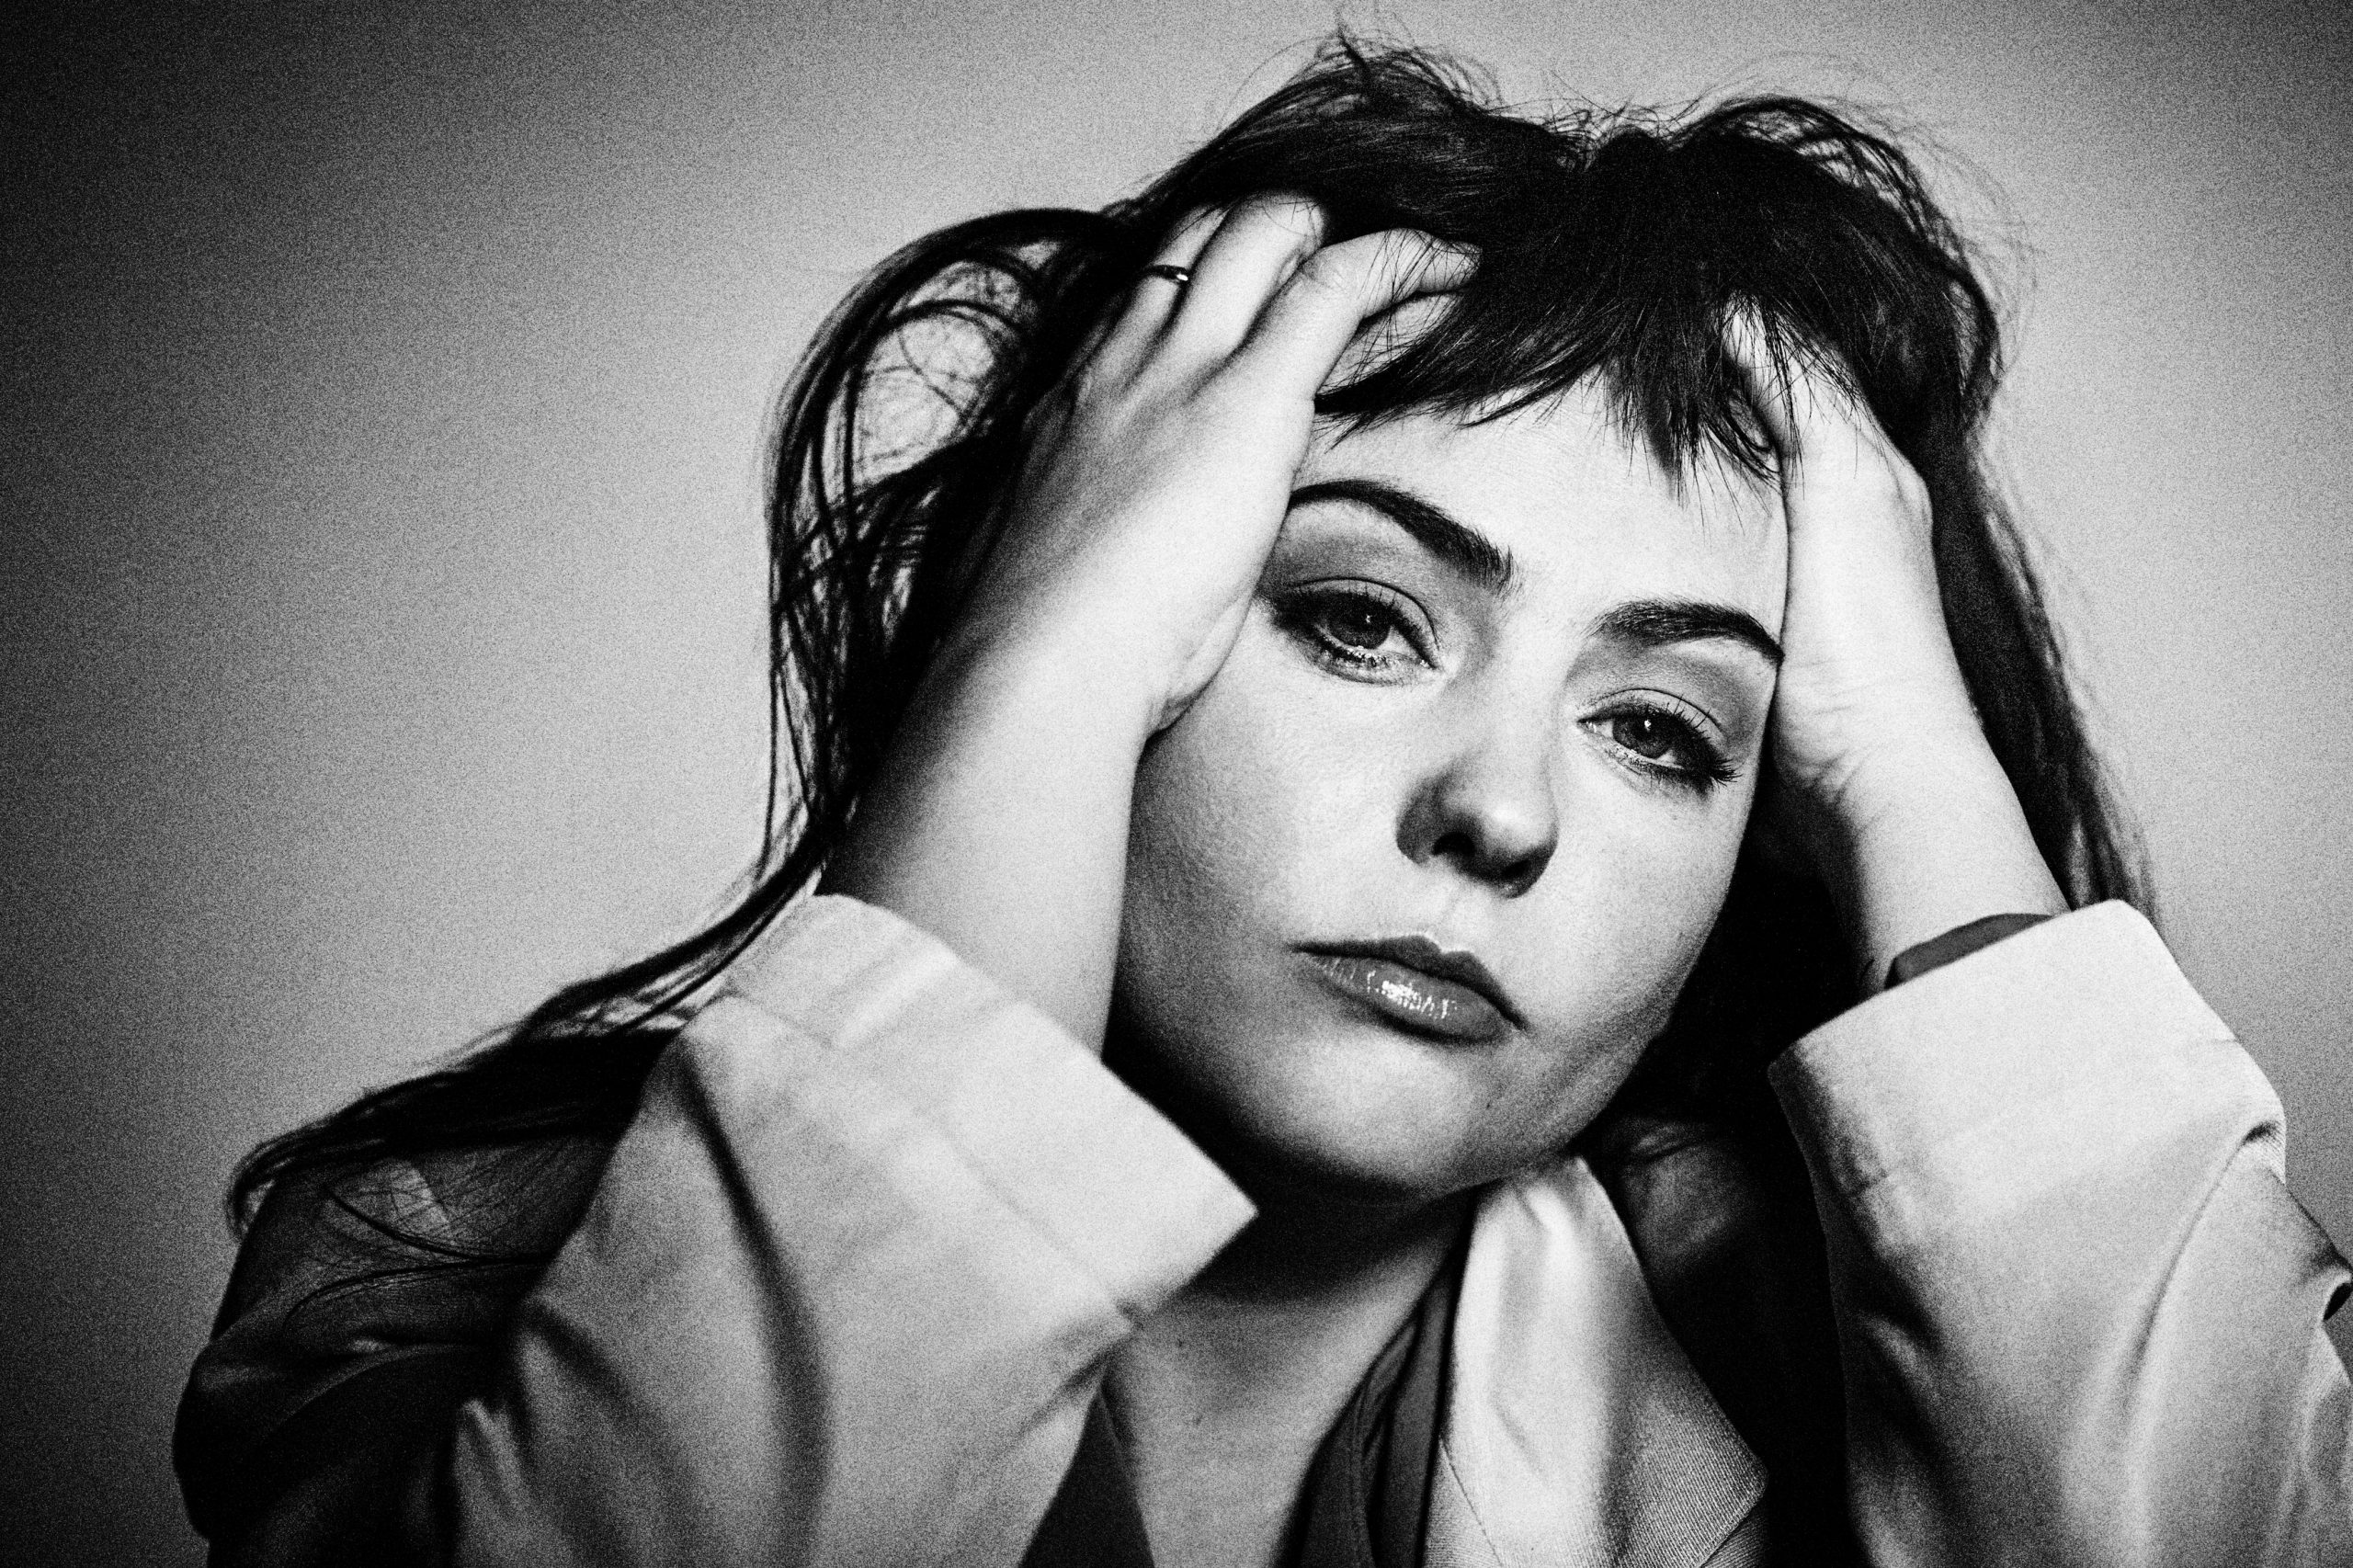 With “Whole New Mess,” Angel Olsen Delivers the Breakup Album We All Need in 2020